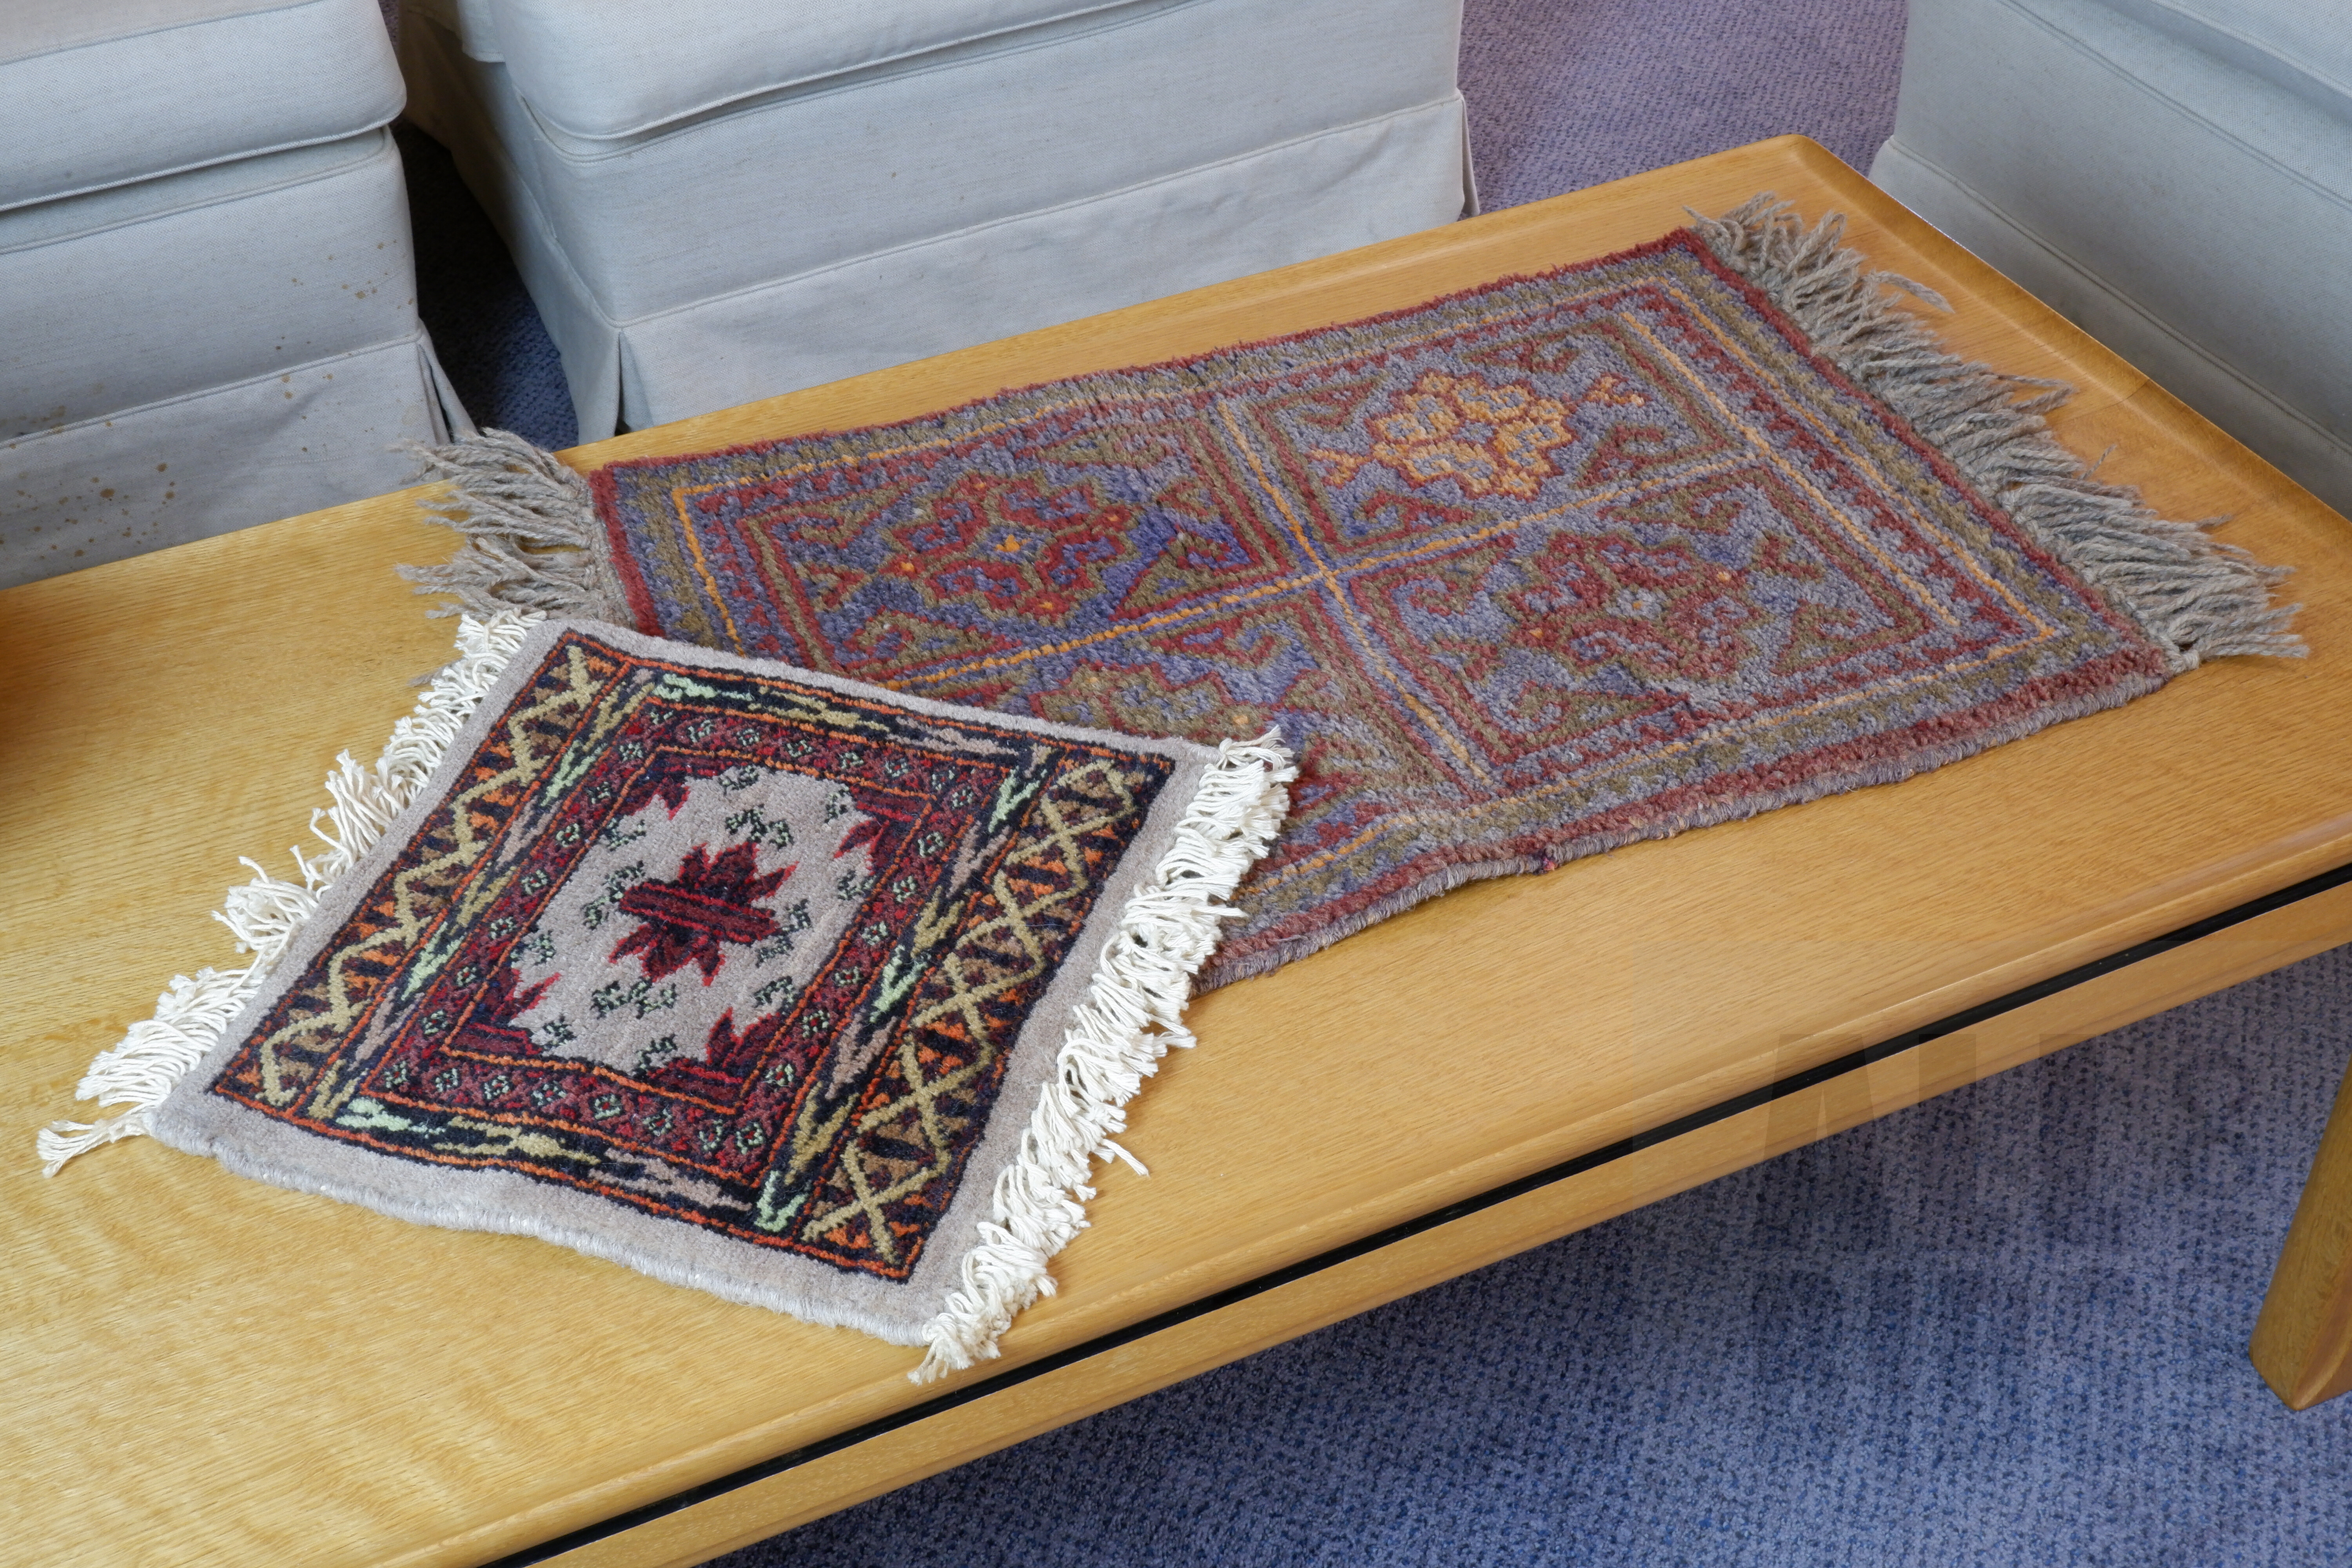 'Small Hand Knotted Wool Pile Rug, Ex Cadrys and Another Mat'